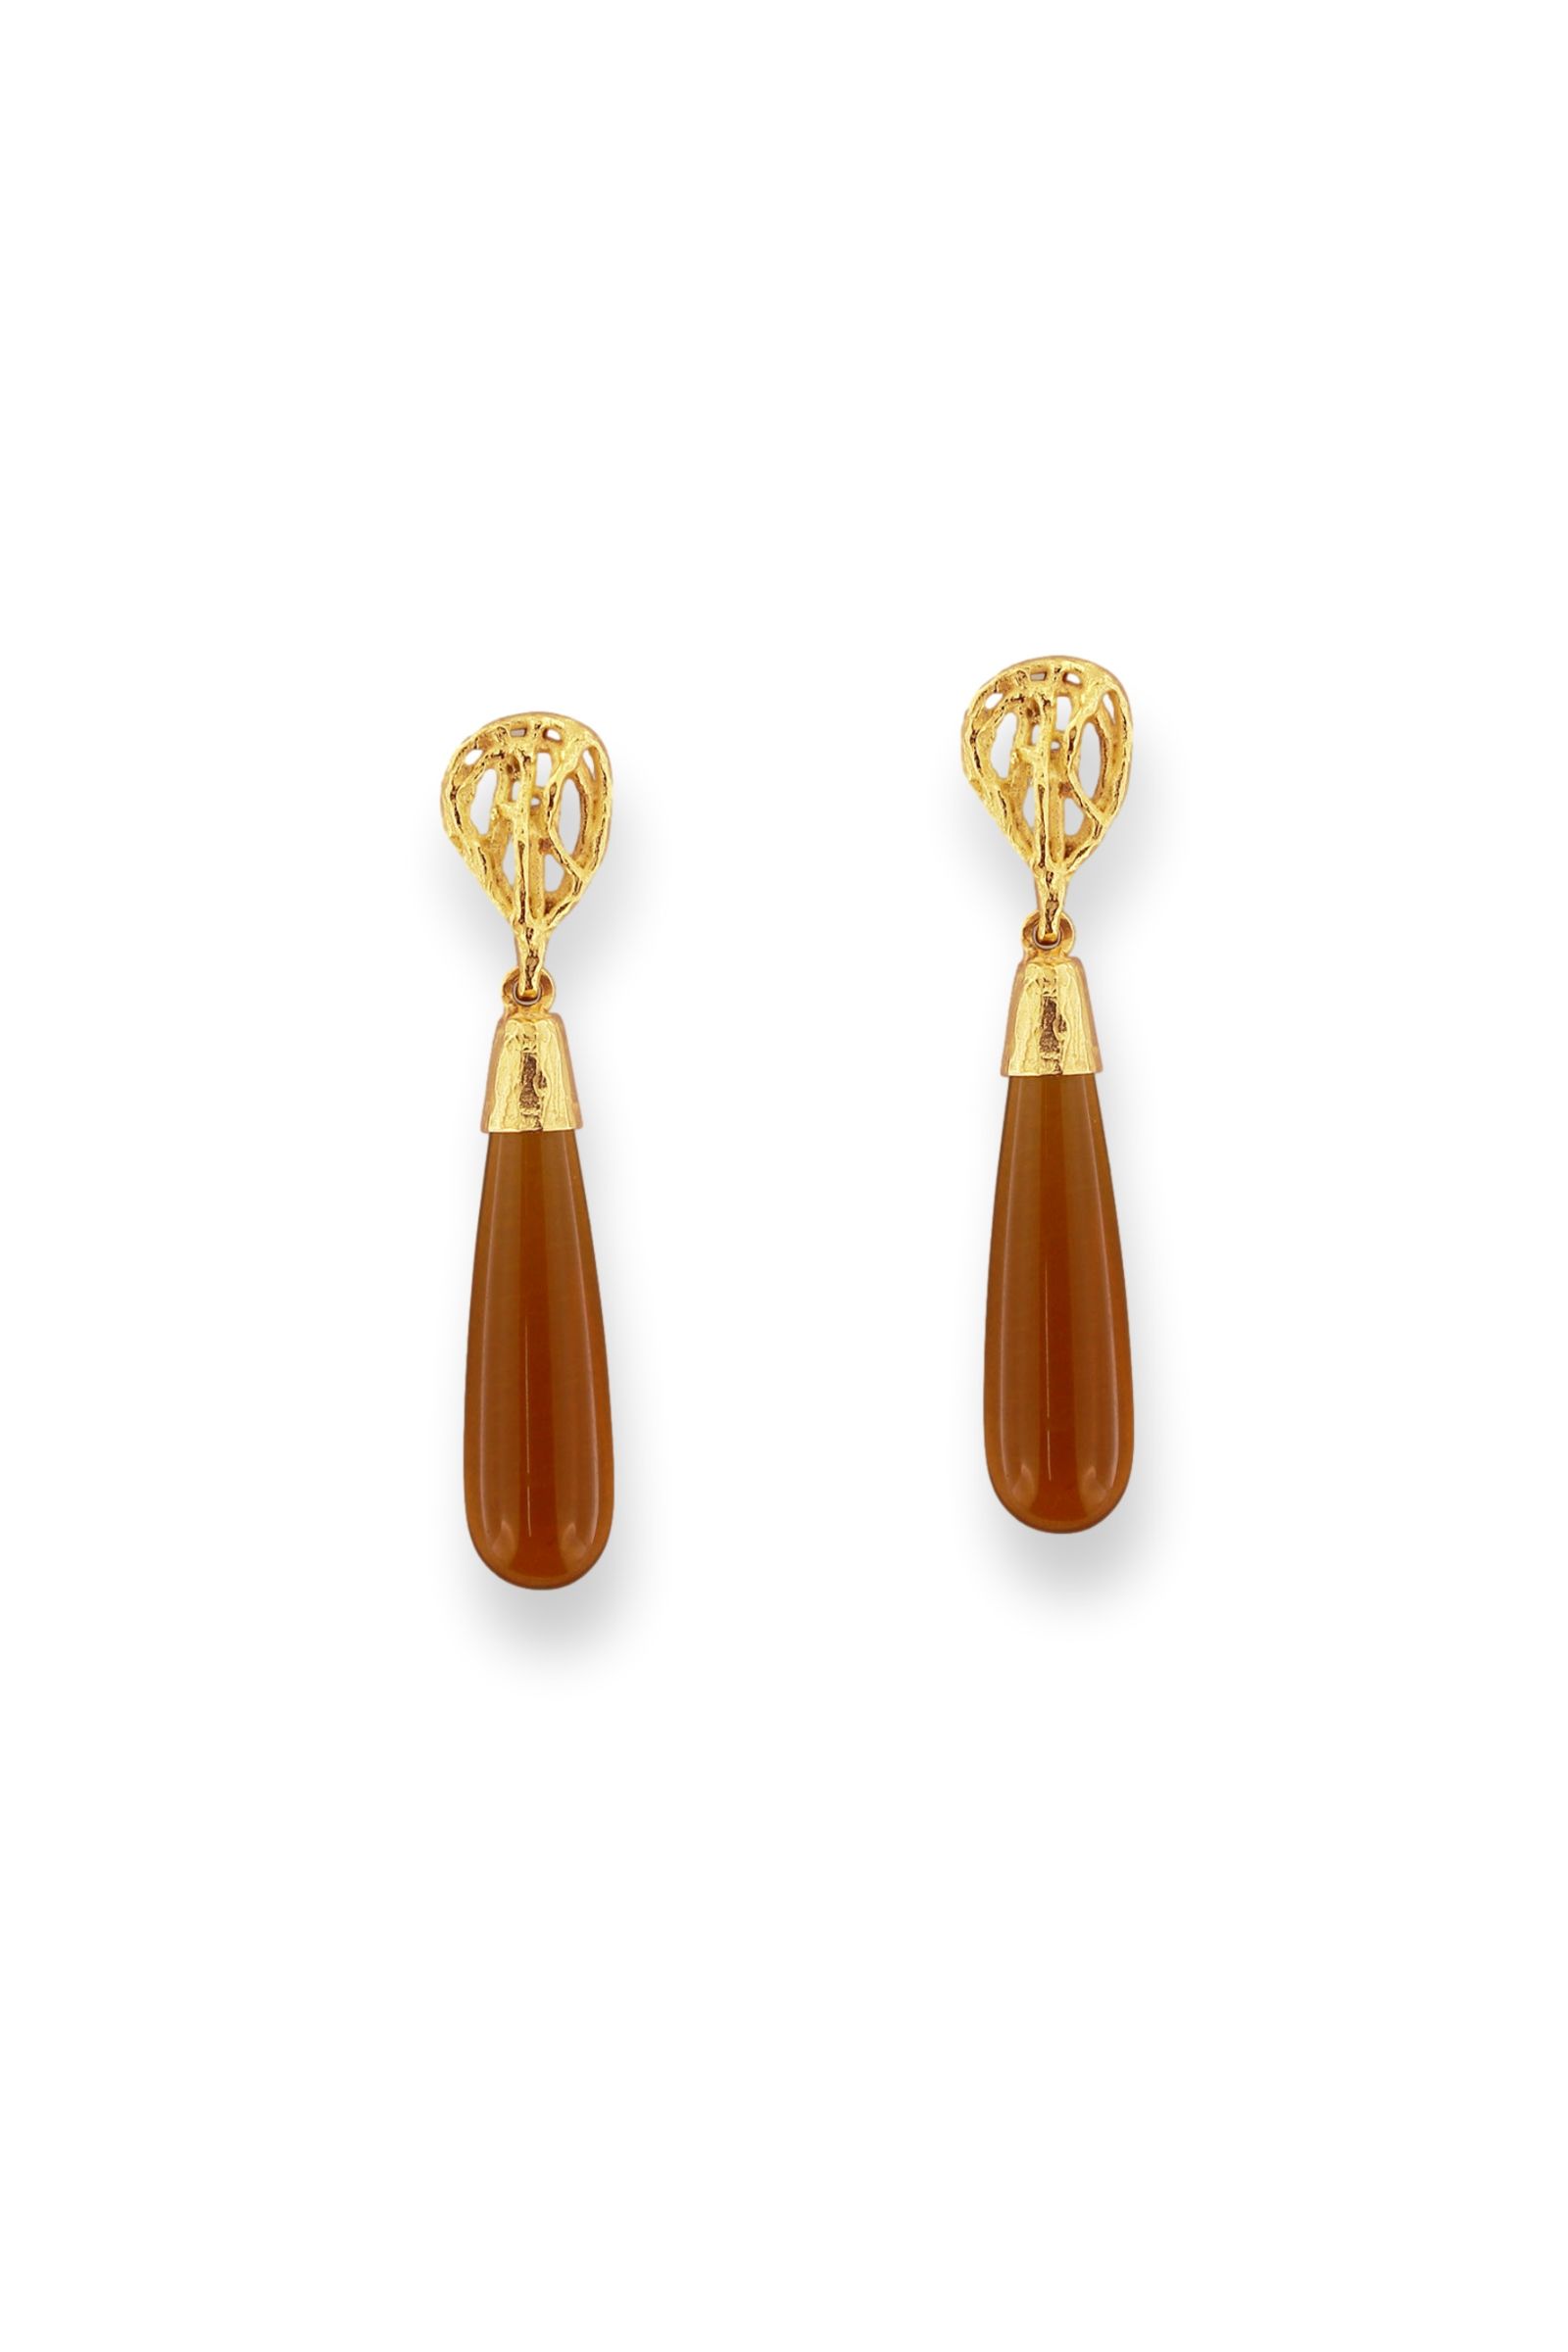 SD255A-18-Kt-Yellow-Gold-Pendant-Earrings-with-Topaz-Fume-1_